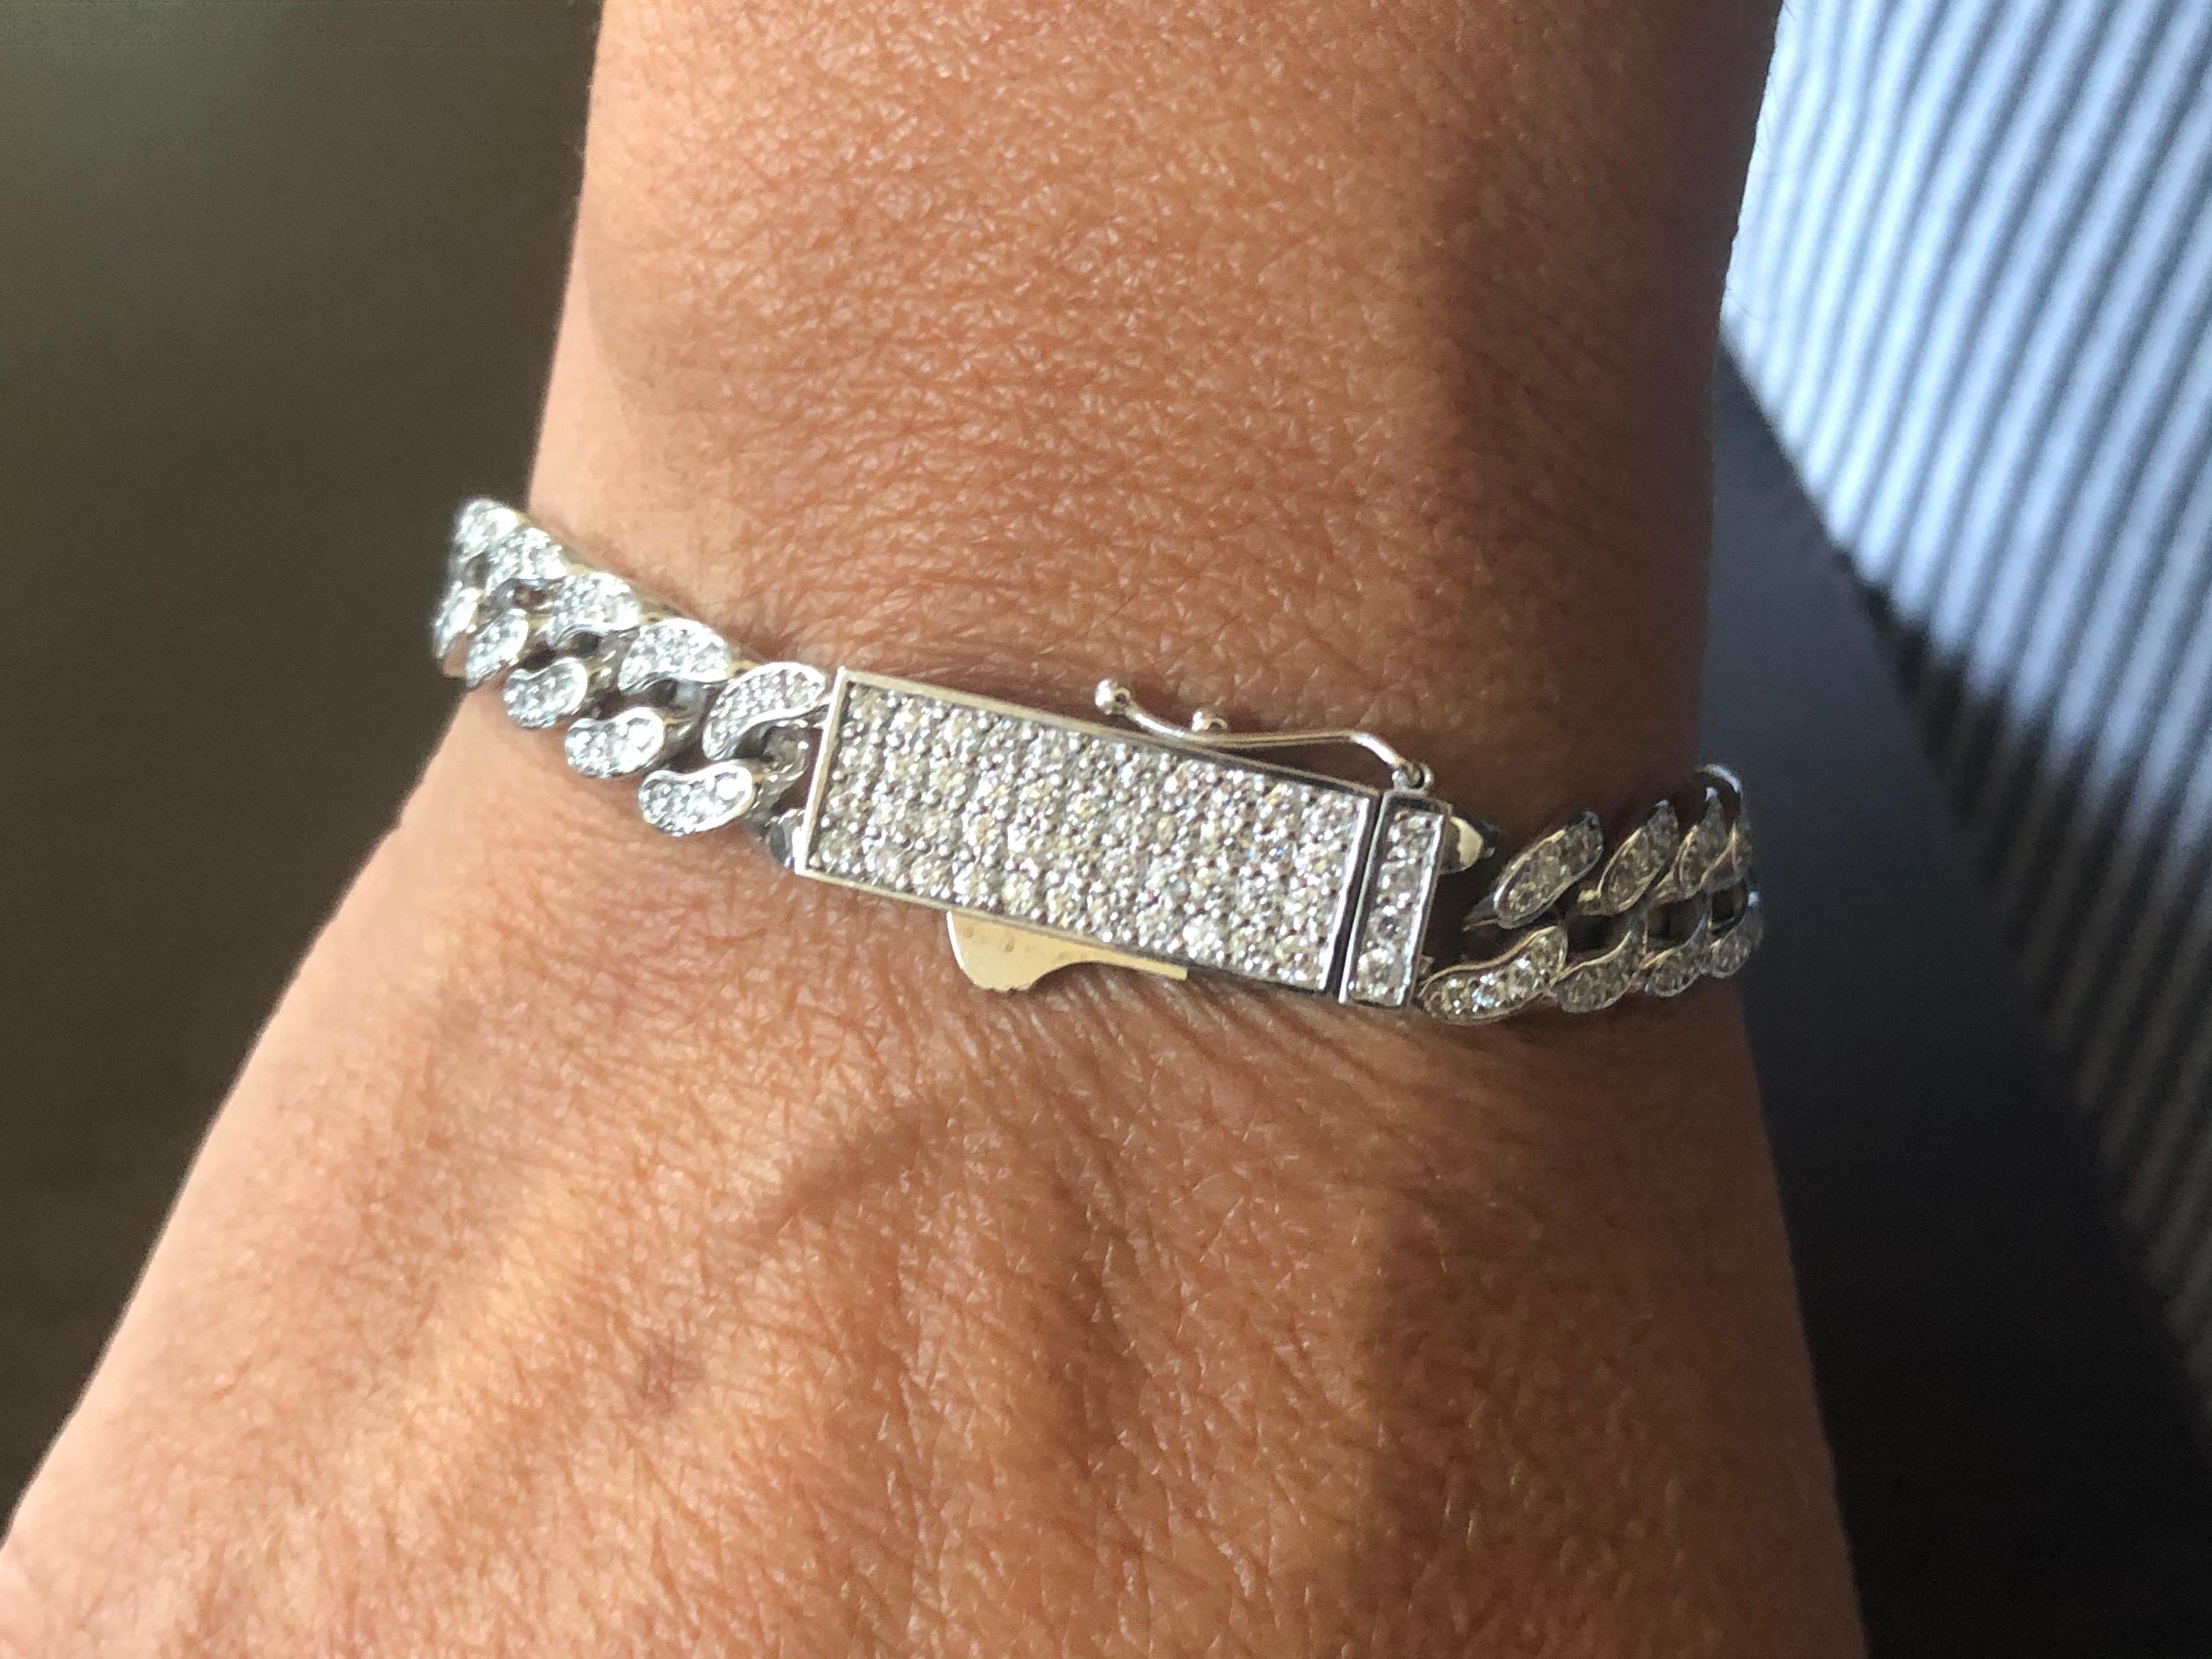 Cuban Diamond bracelet set in 14K white gold. The bracelet is manufactured in Italy. The total carat weight of the bracelet is 3.04 carats. The color of the stones are G-H, the clarity is SI1-SI2. The bracelet is available in yellow gold.